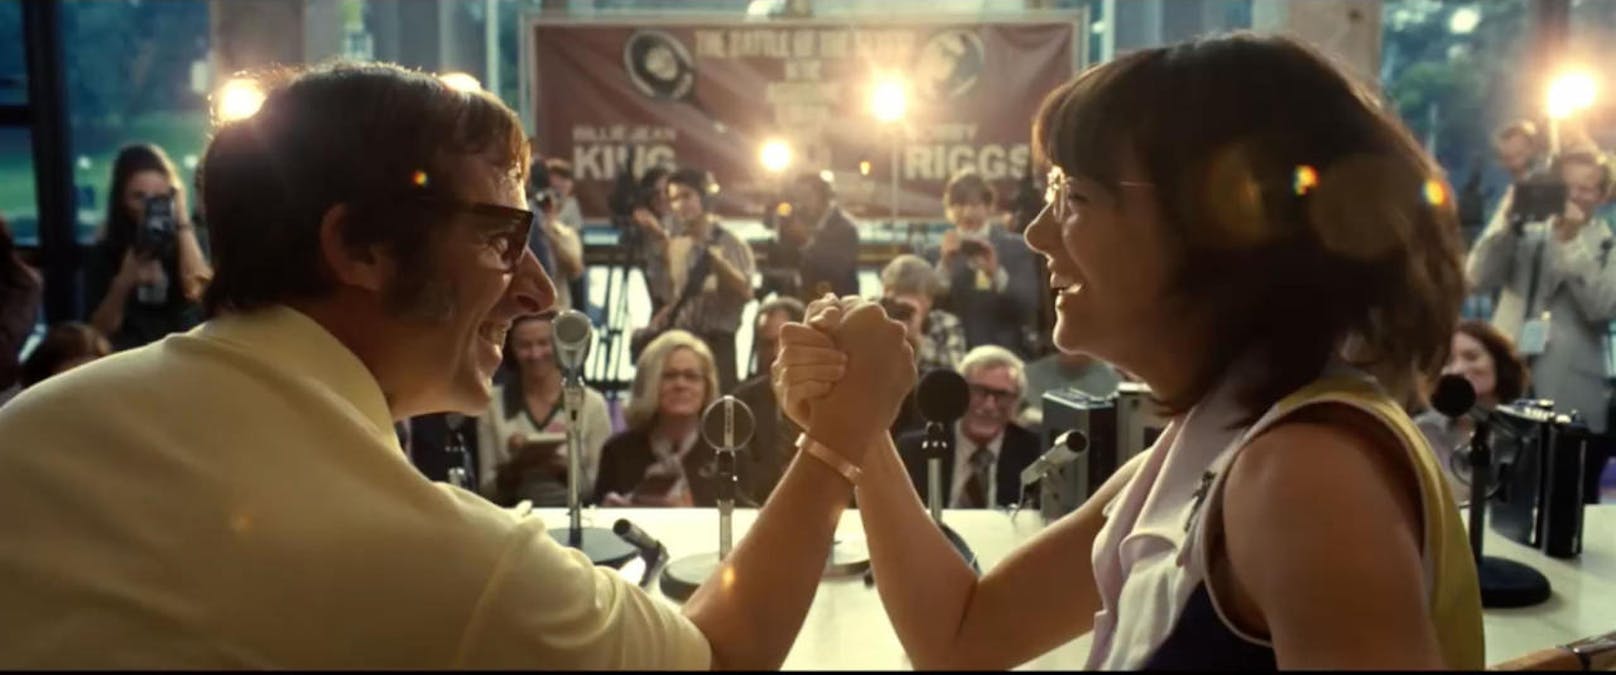 Emma Stone und Steve Carrell als Tennisrivalen Billie Jean King and Bobby Riggs in "Battle of the Sexes"